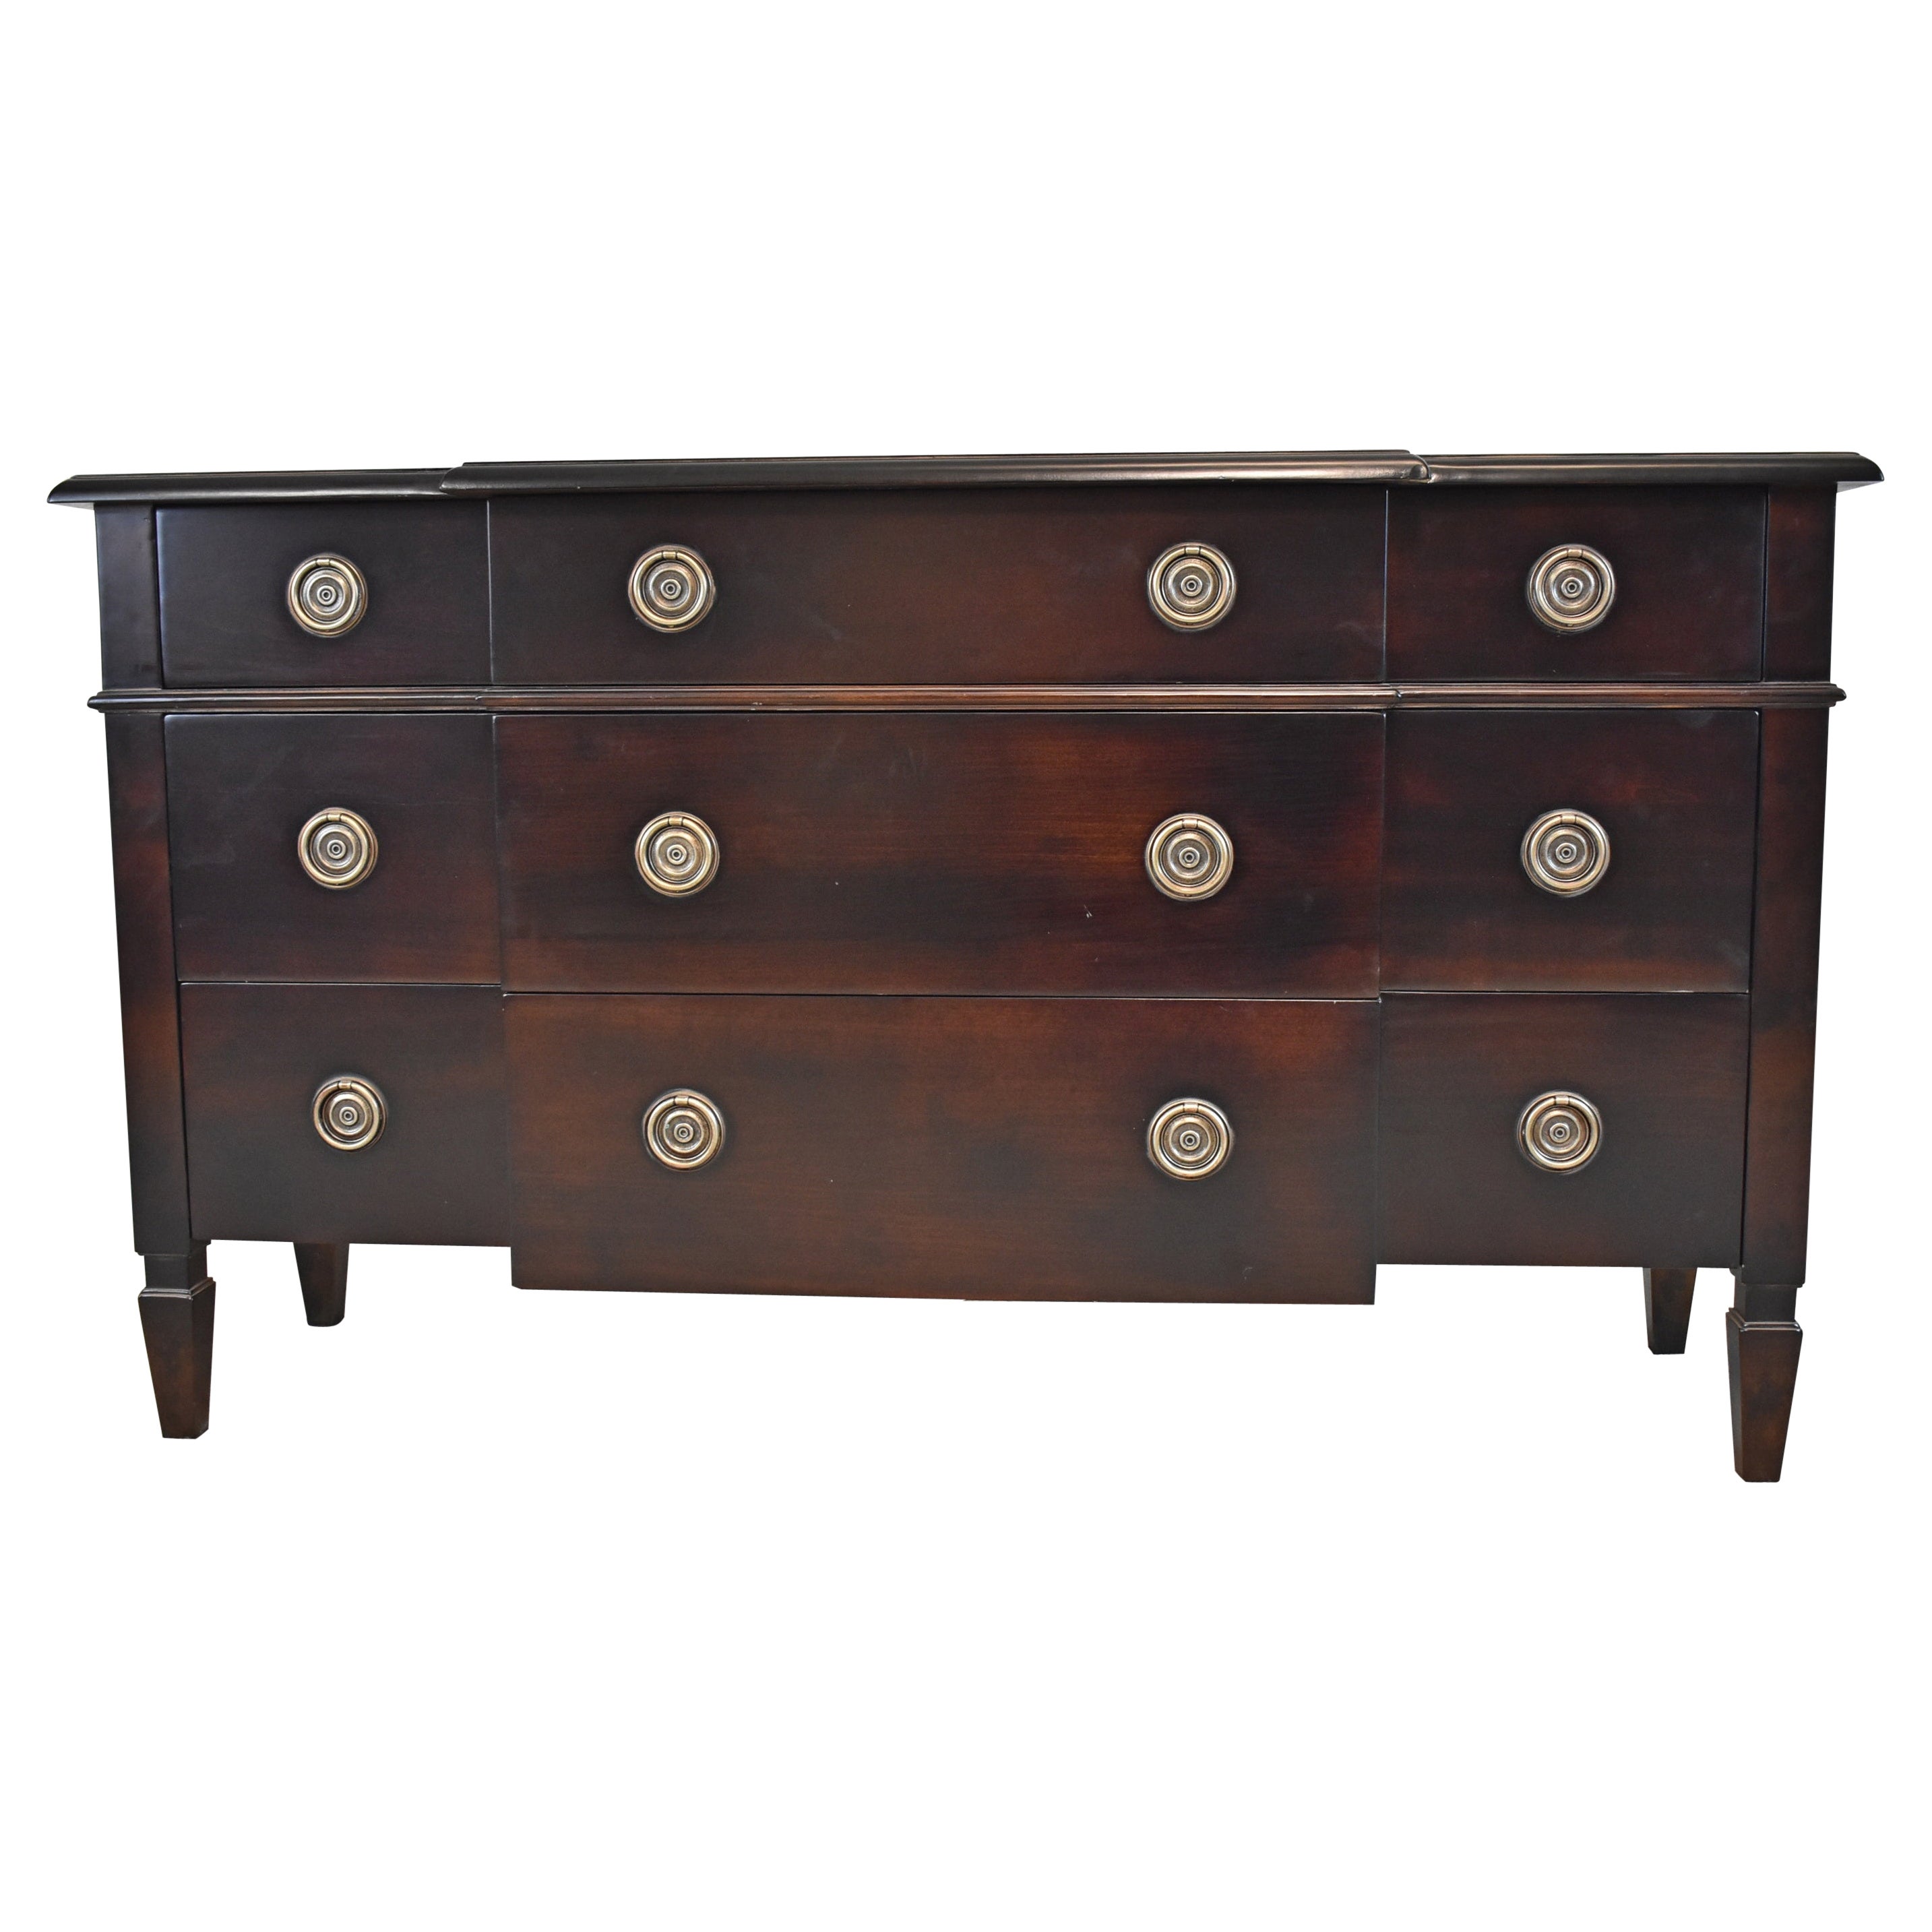 Baker Furniture Expresso Finish Chest of Drawers Milling Road Collection